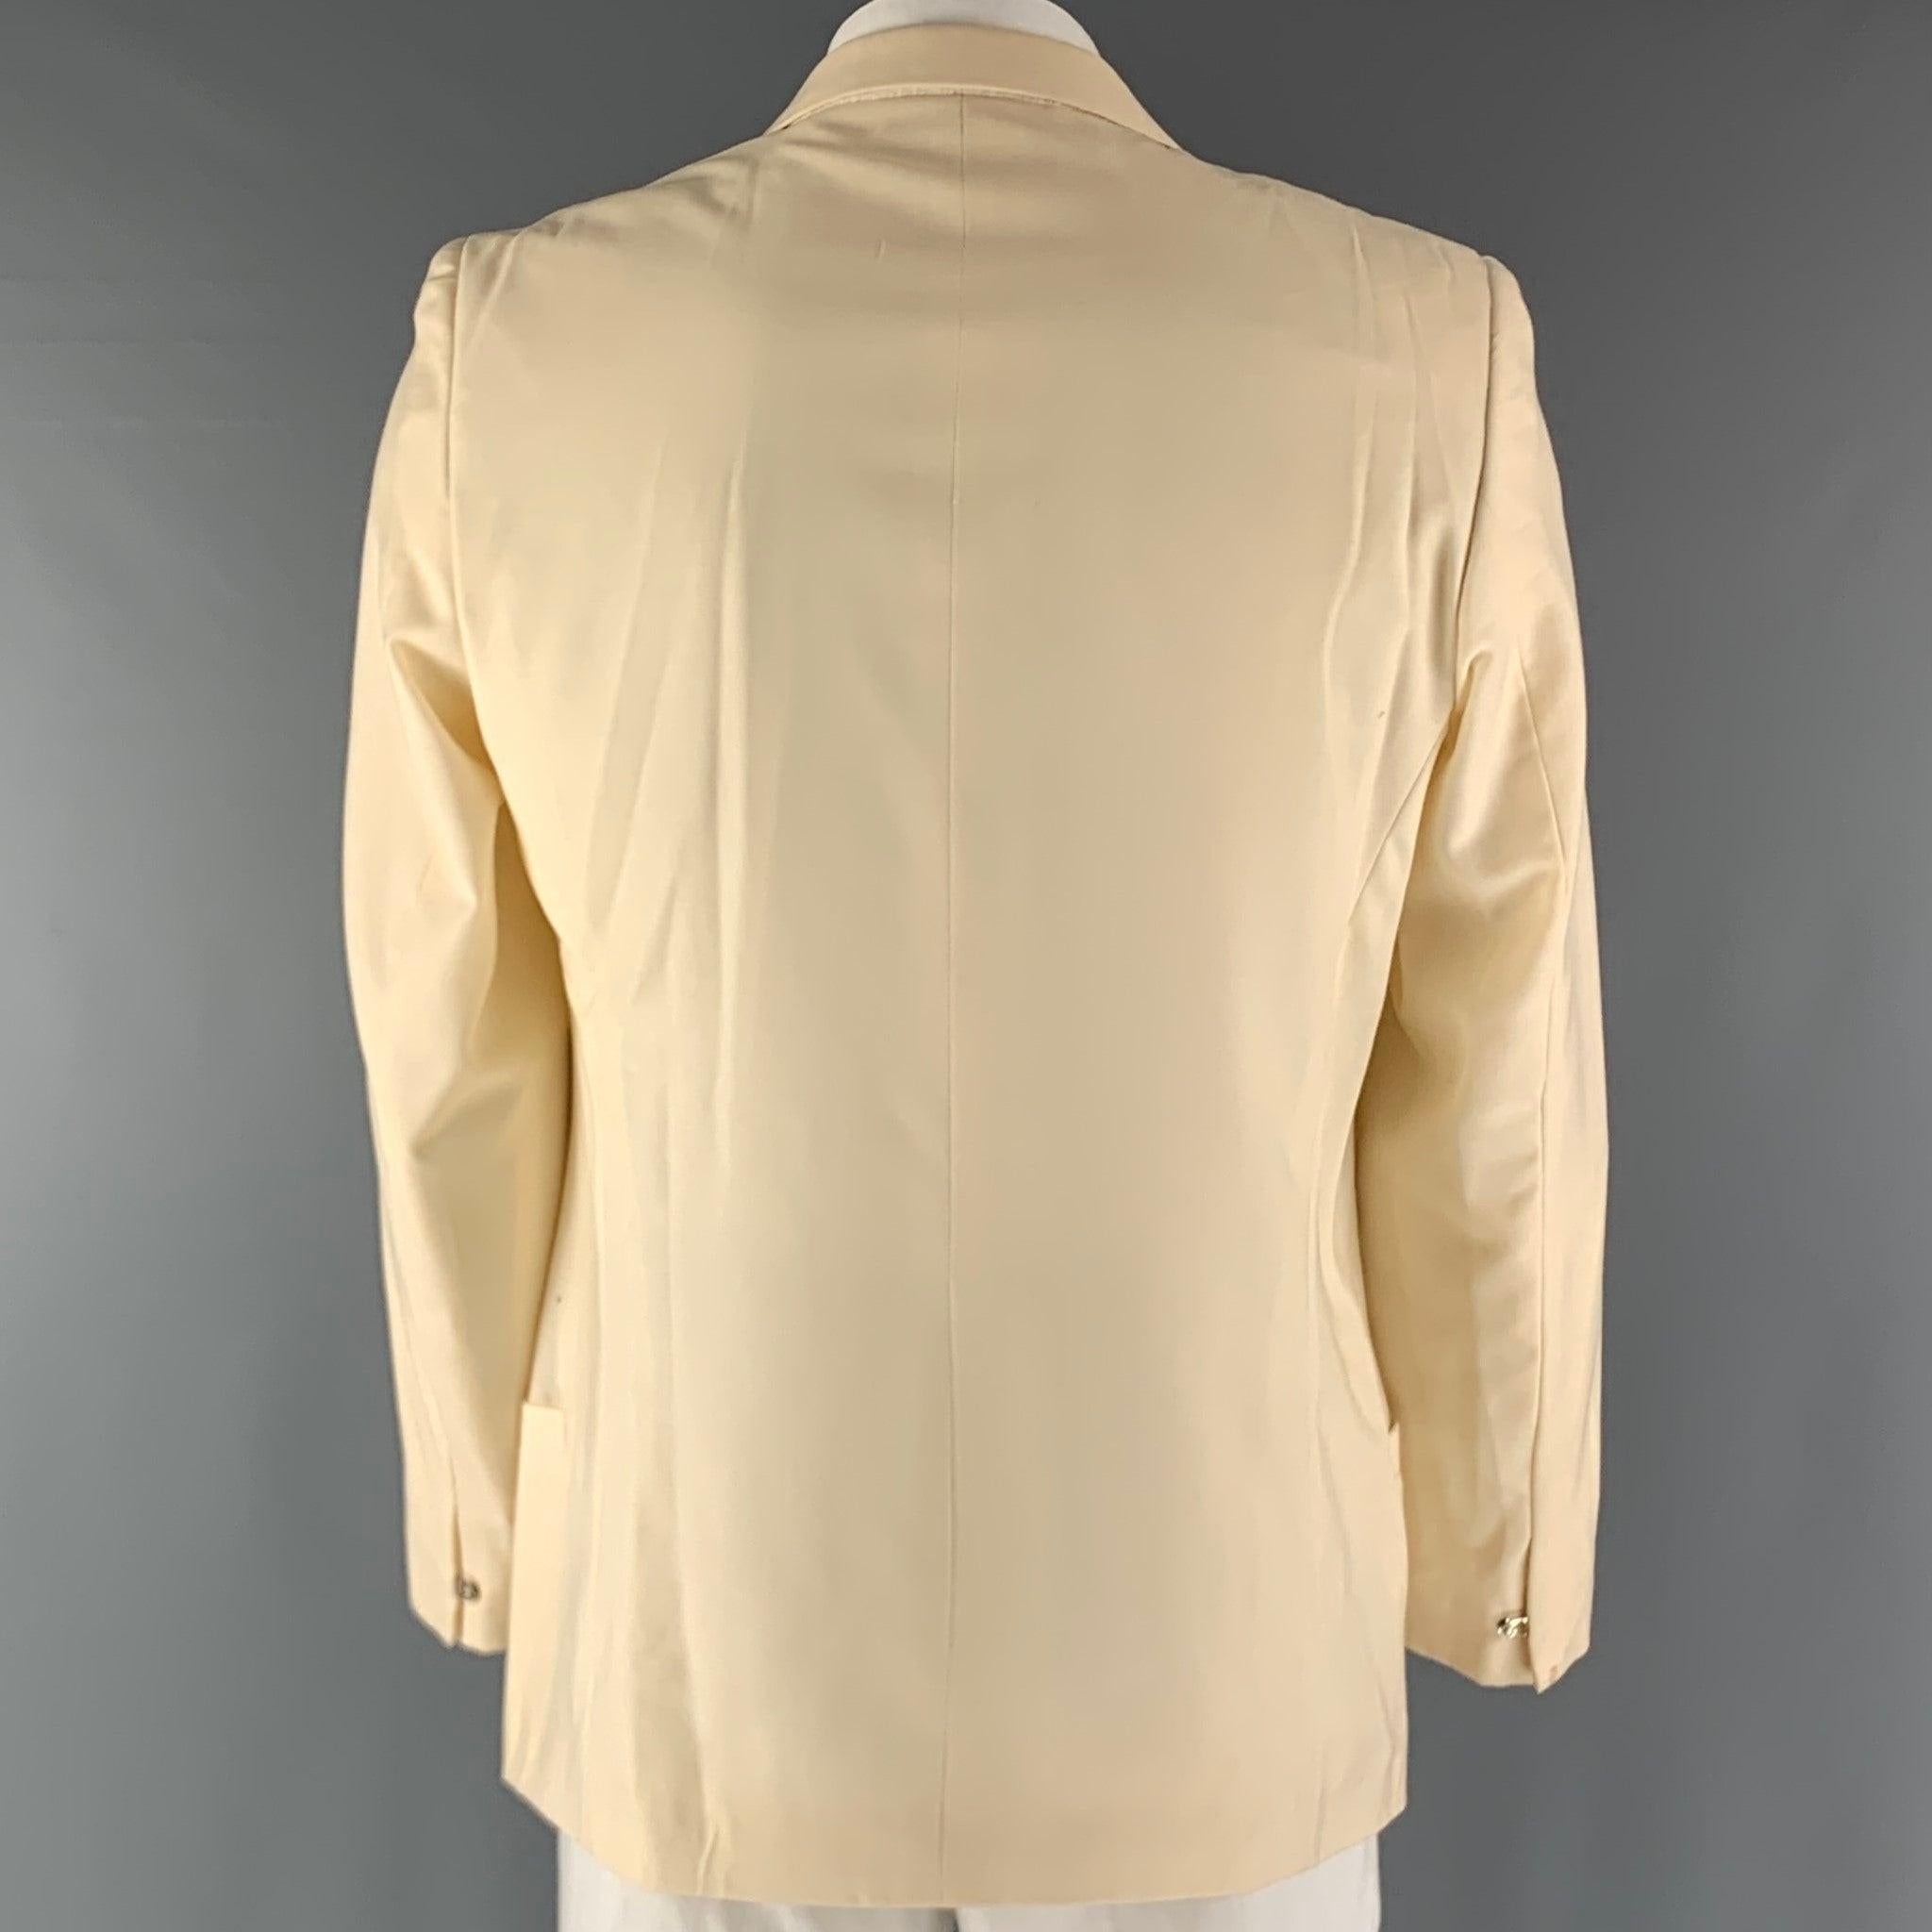 Men's GIANNI VERSACE Chest Size 42 Cream Single breasted Jacket